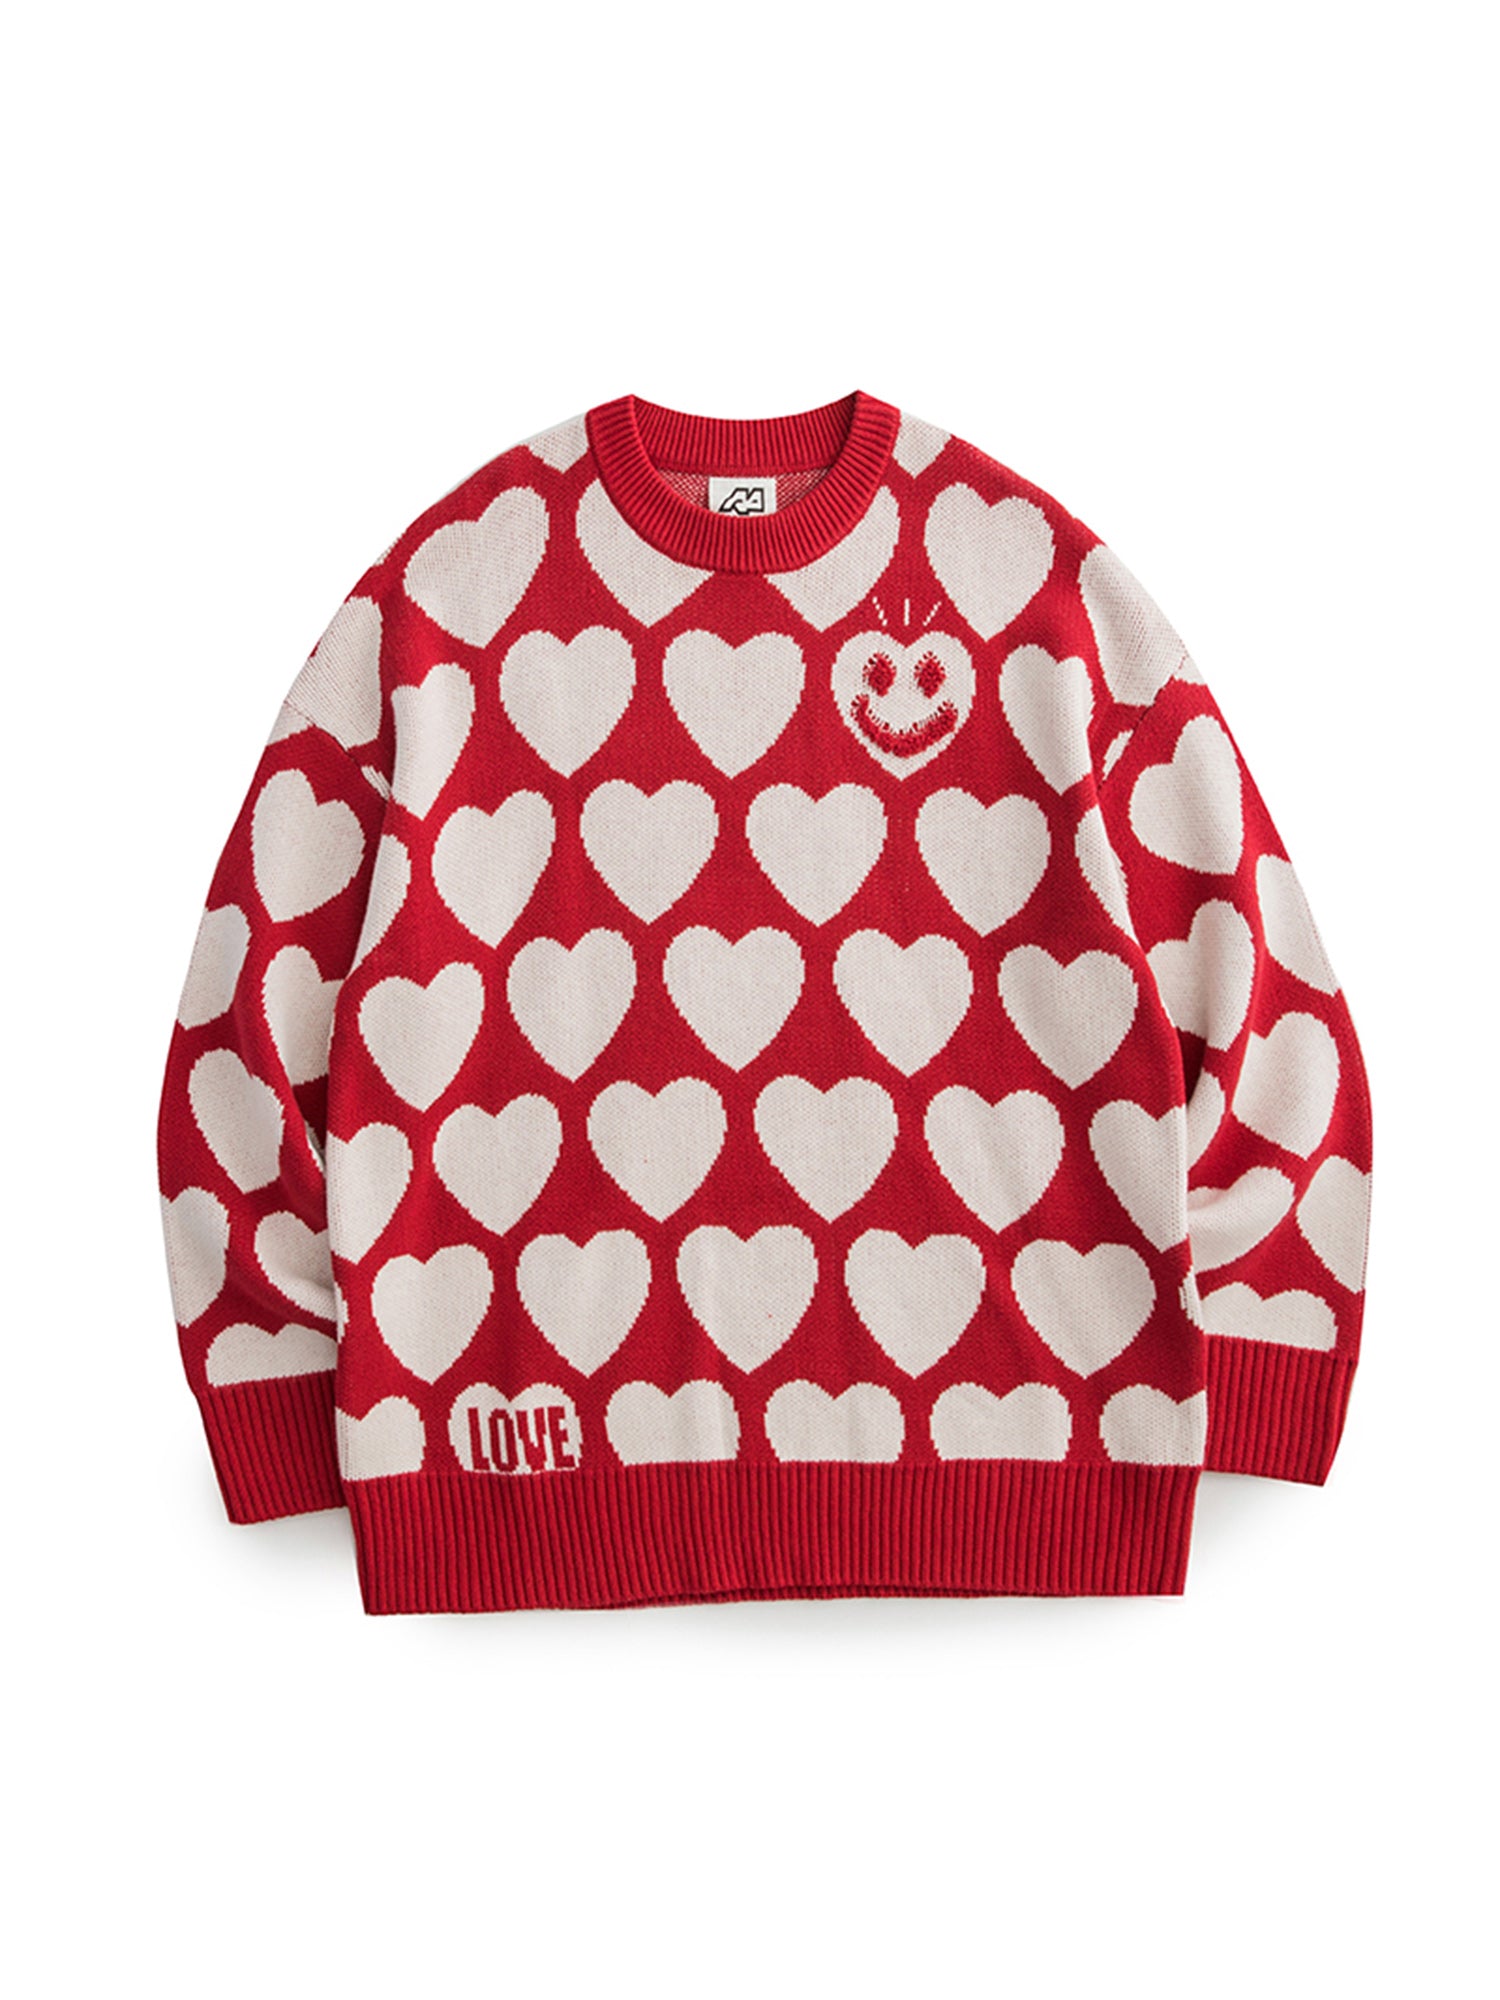 Heart Design Round-Neck Long-Sleeve Sweaters for men's